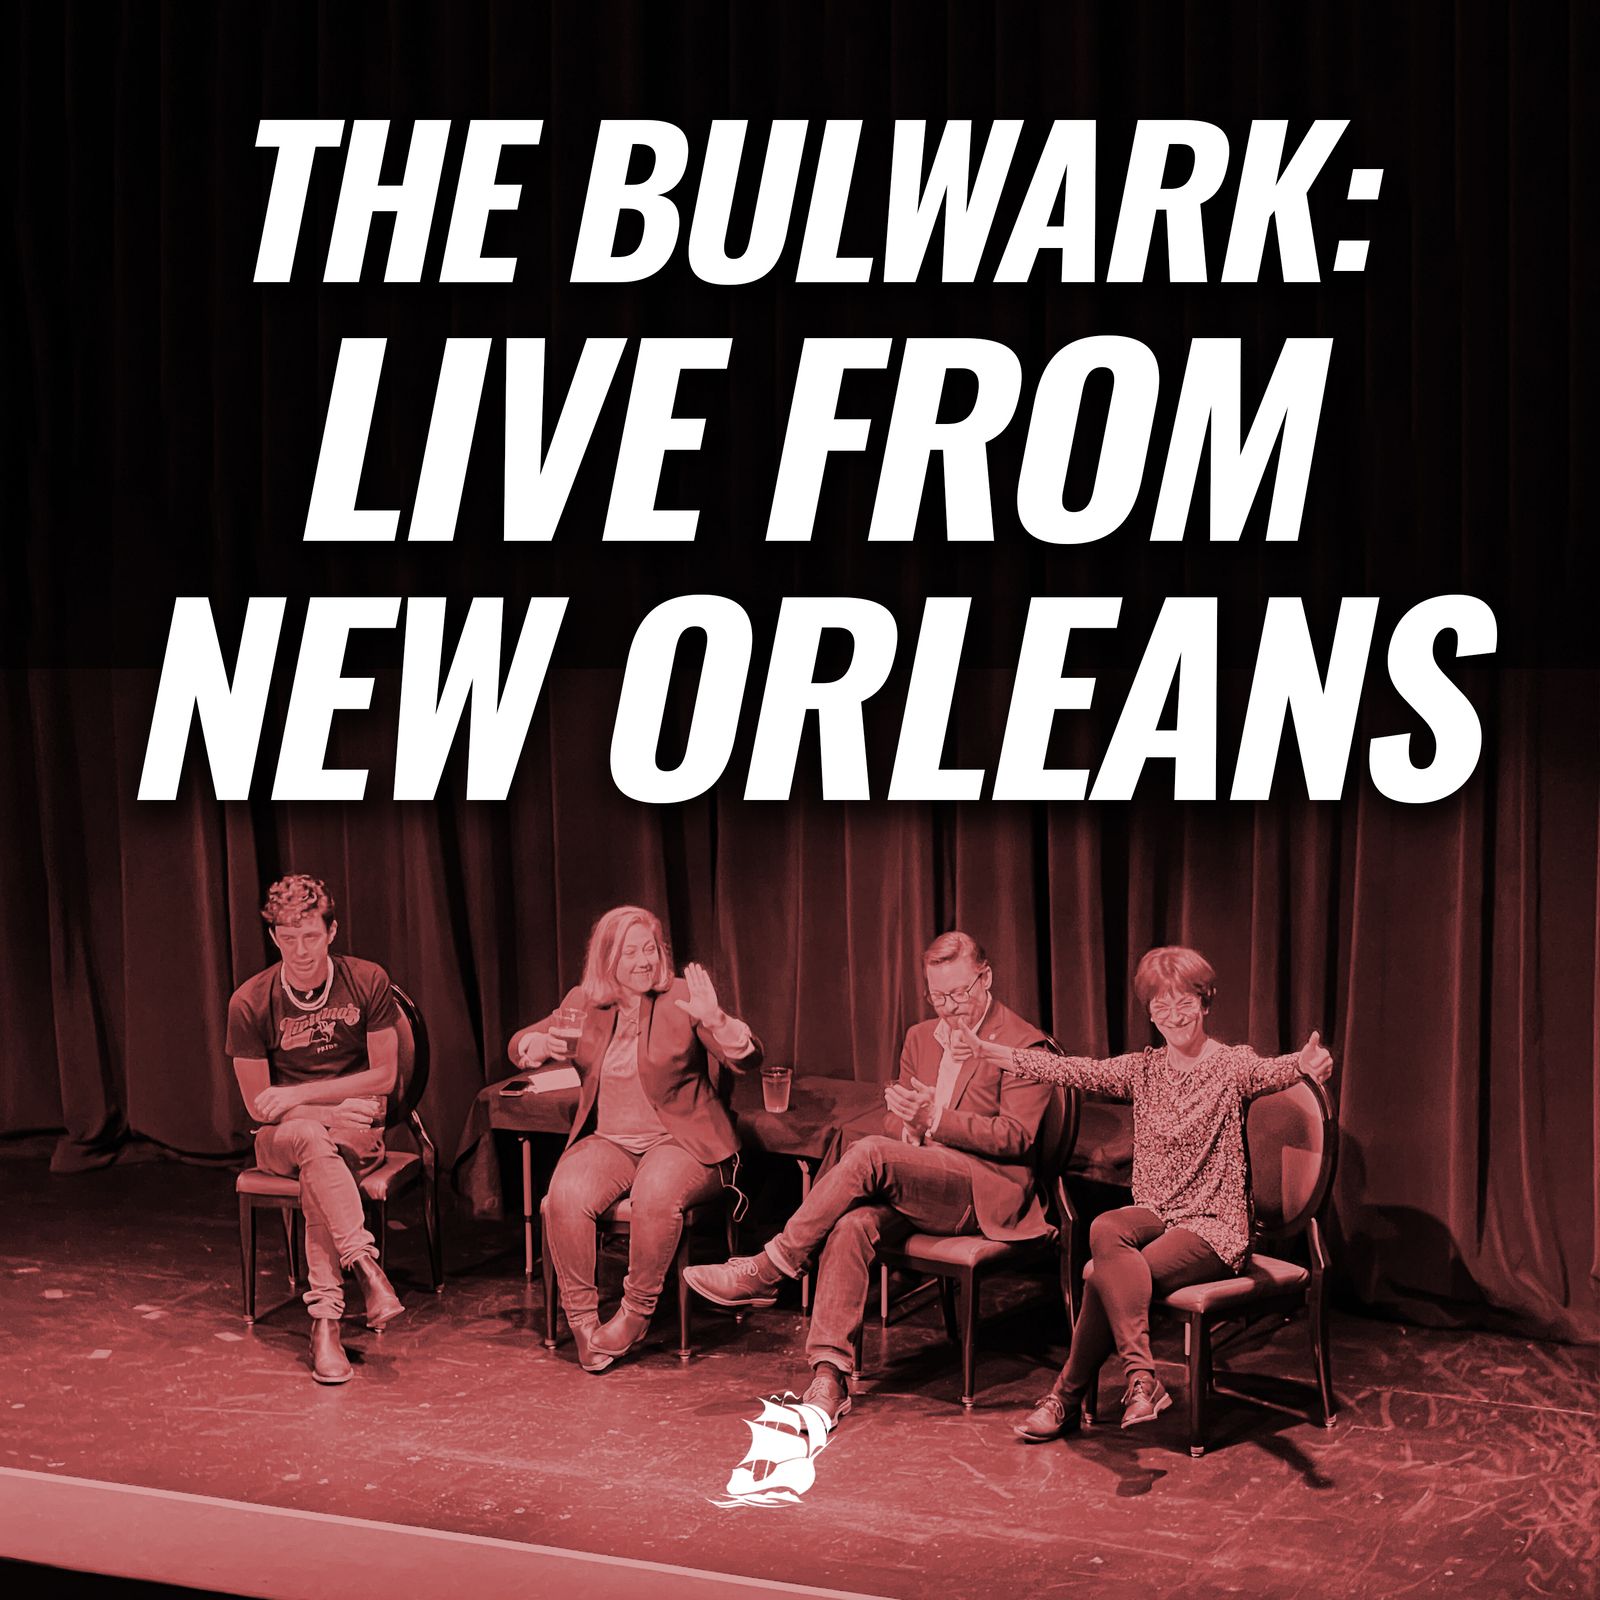 The Bulwark: Live from New Orleans